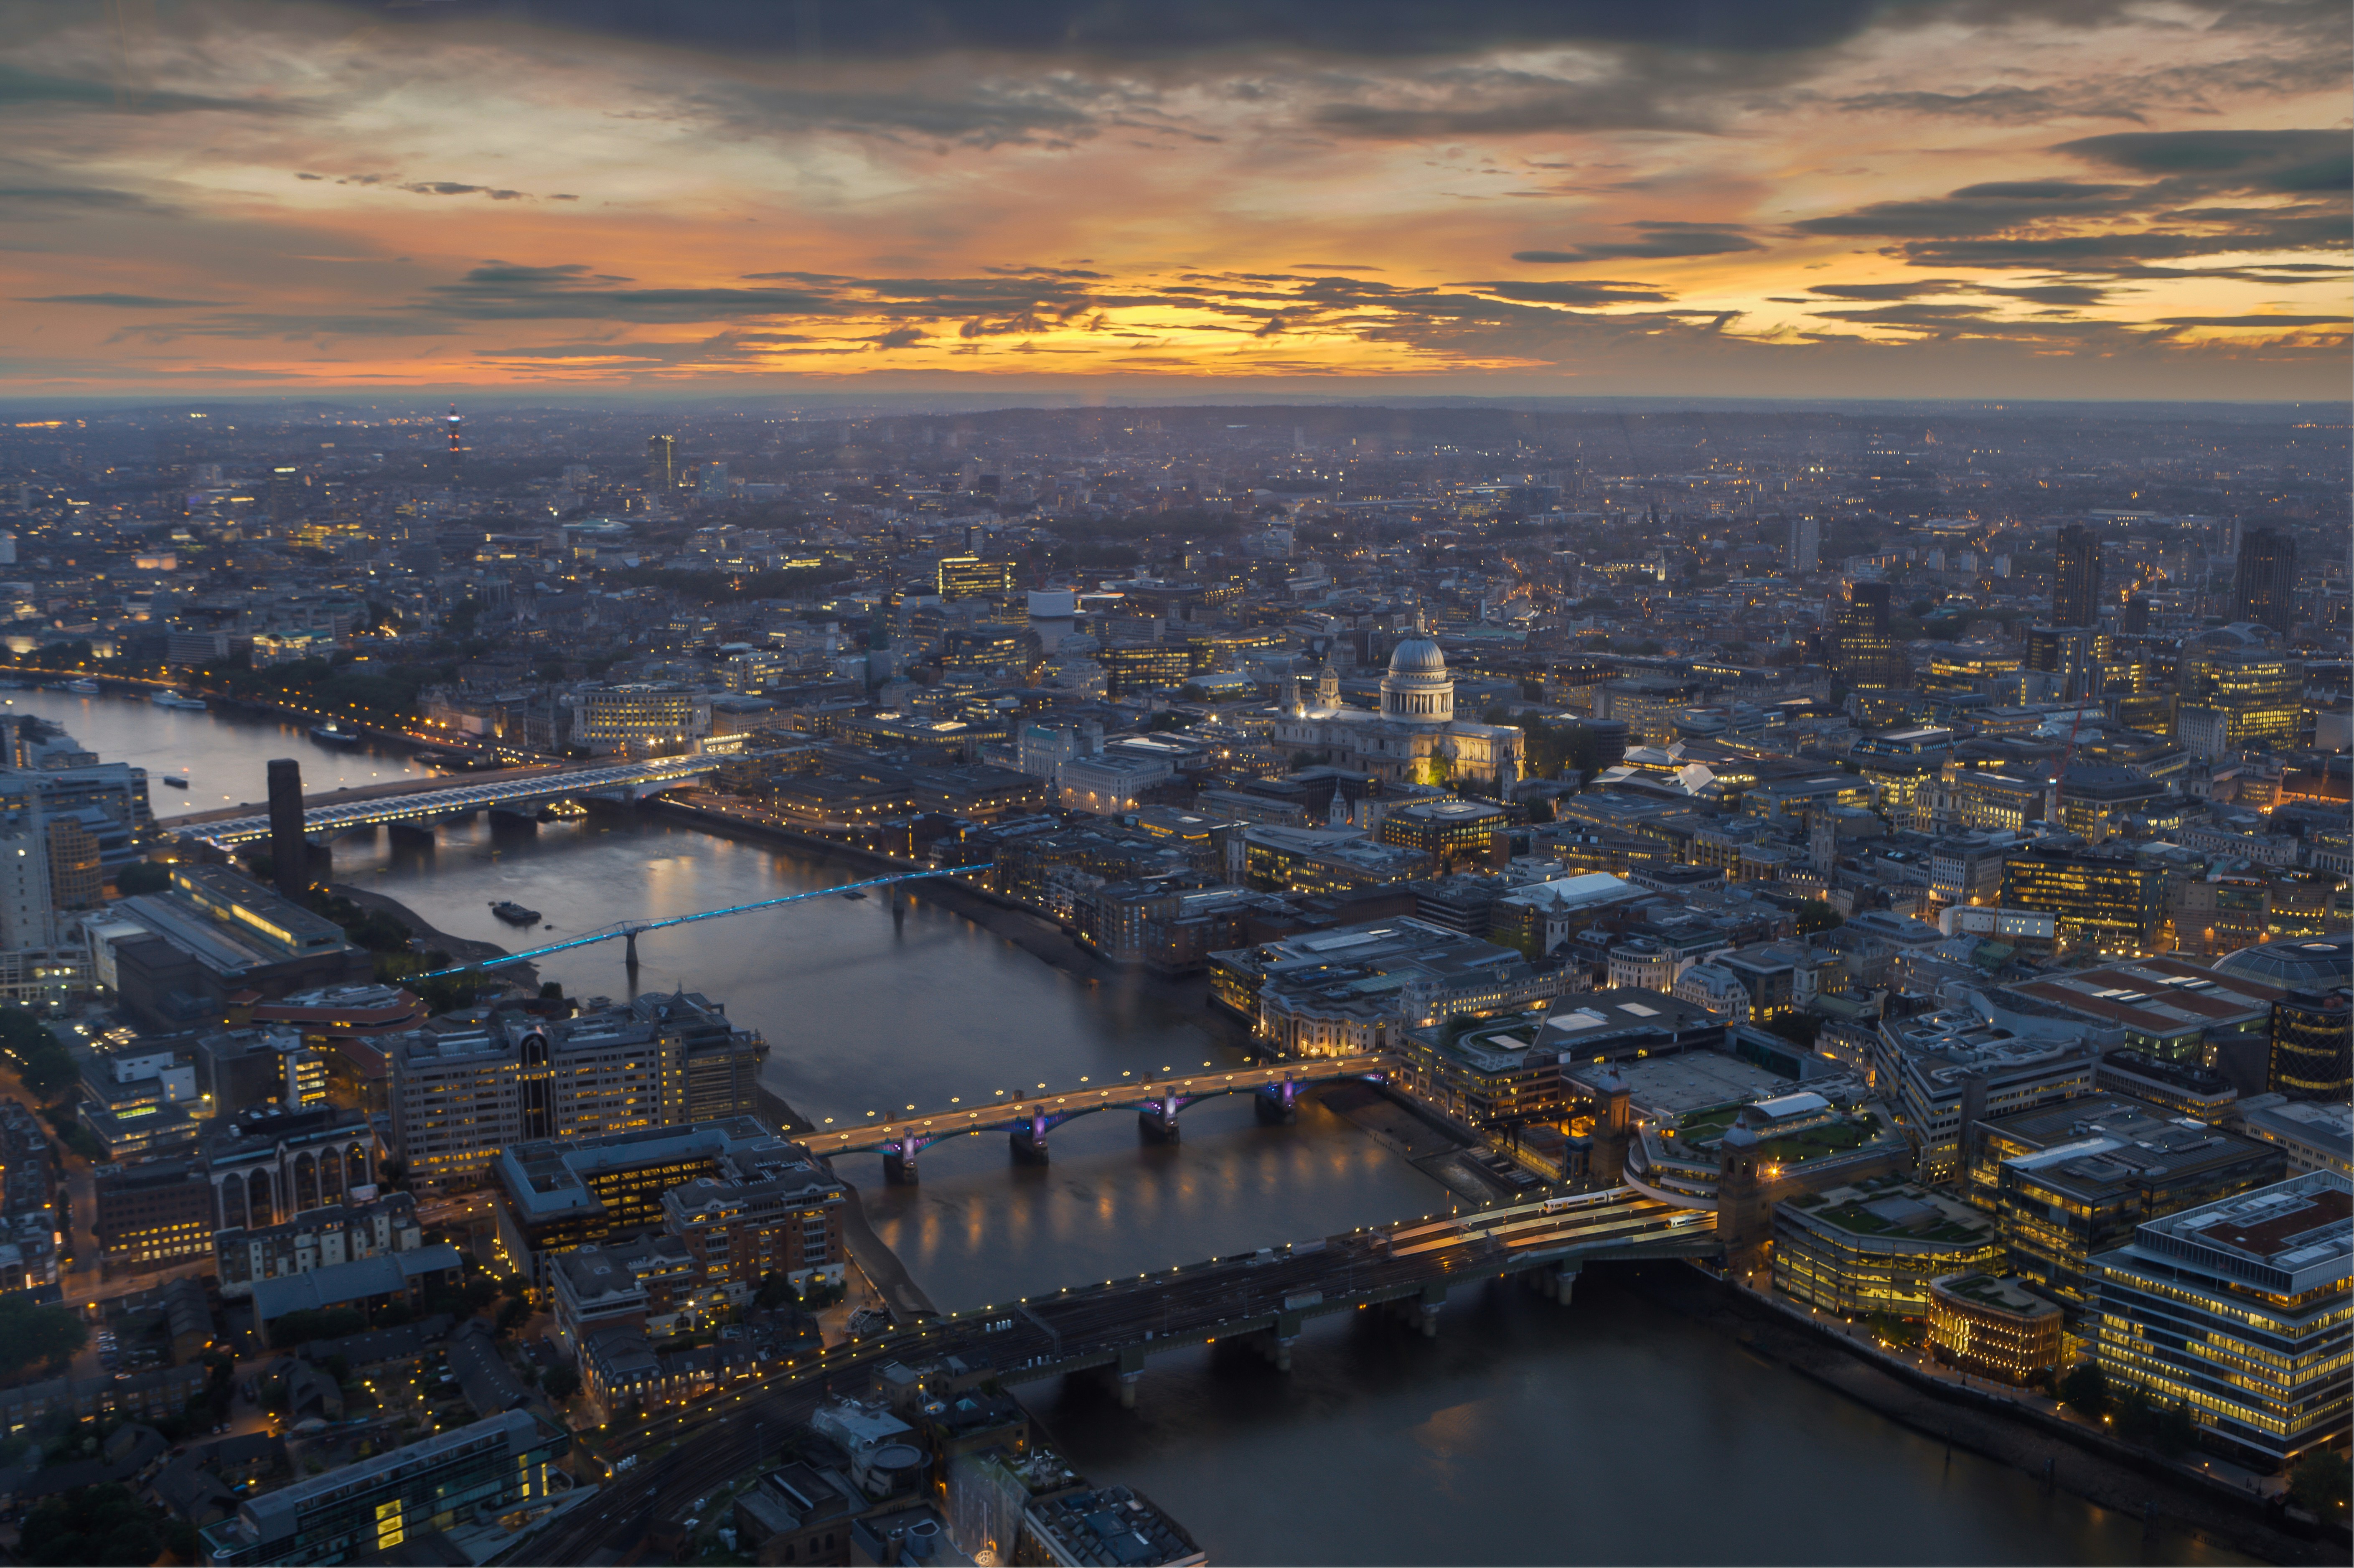 Shot from the top of The Shard